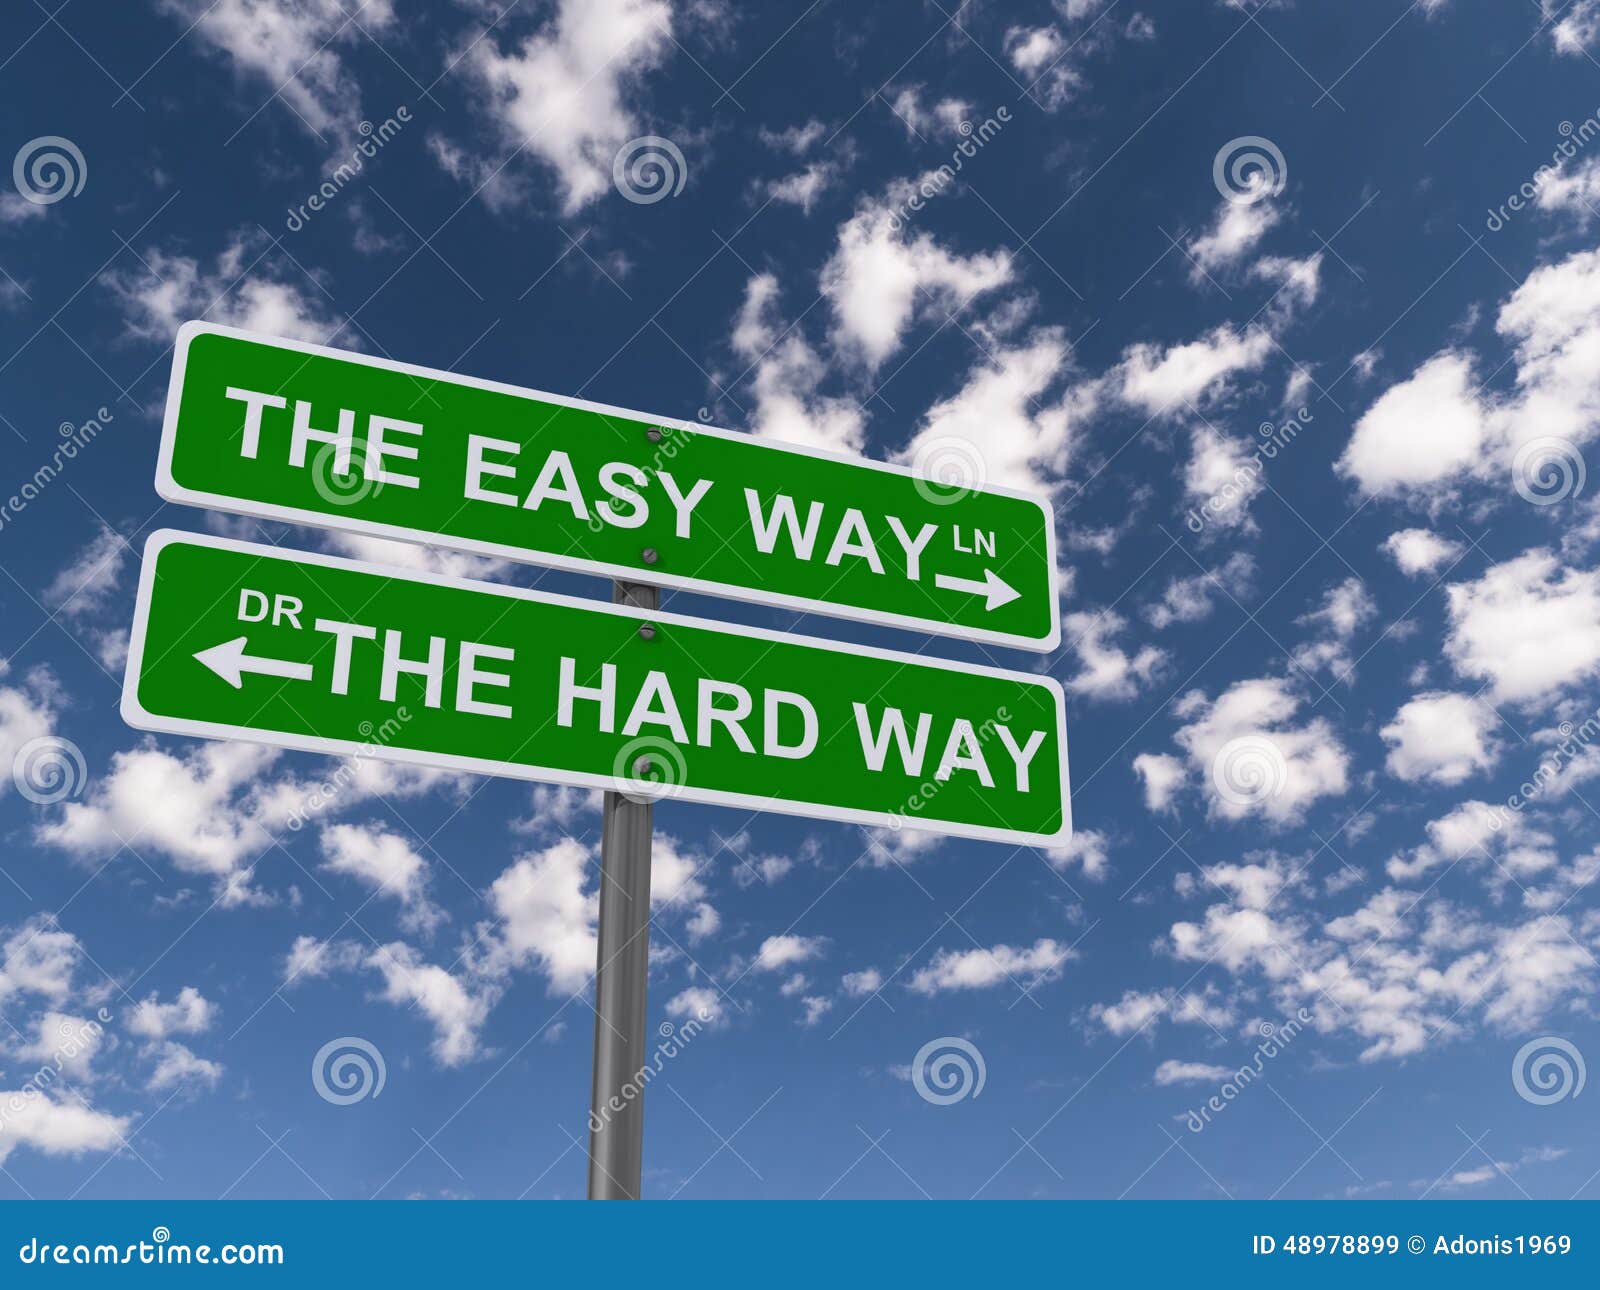 easy and hard way sign